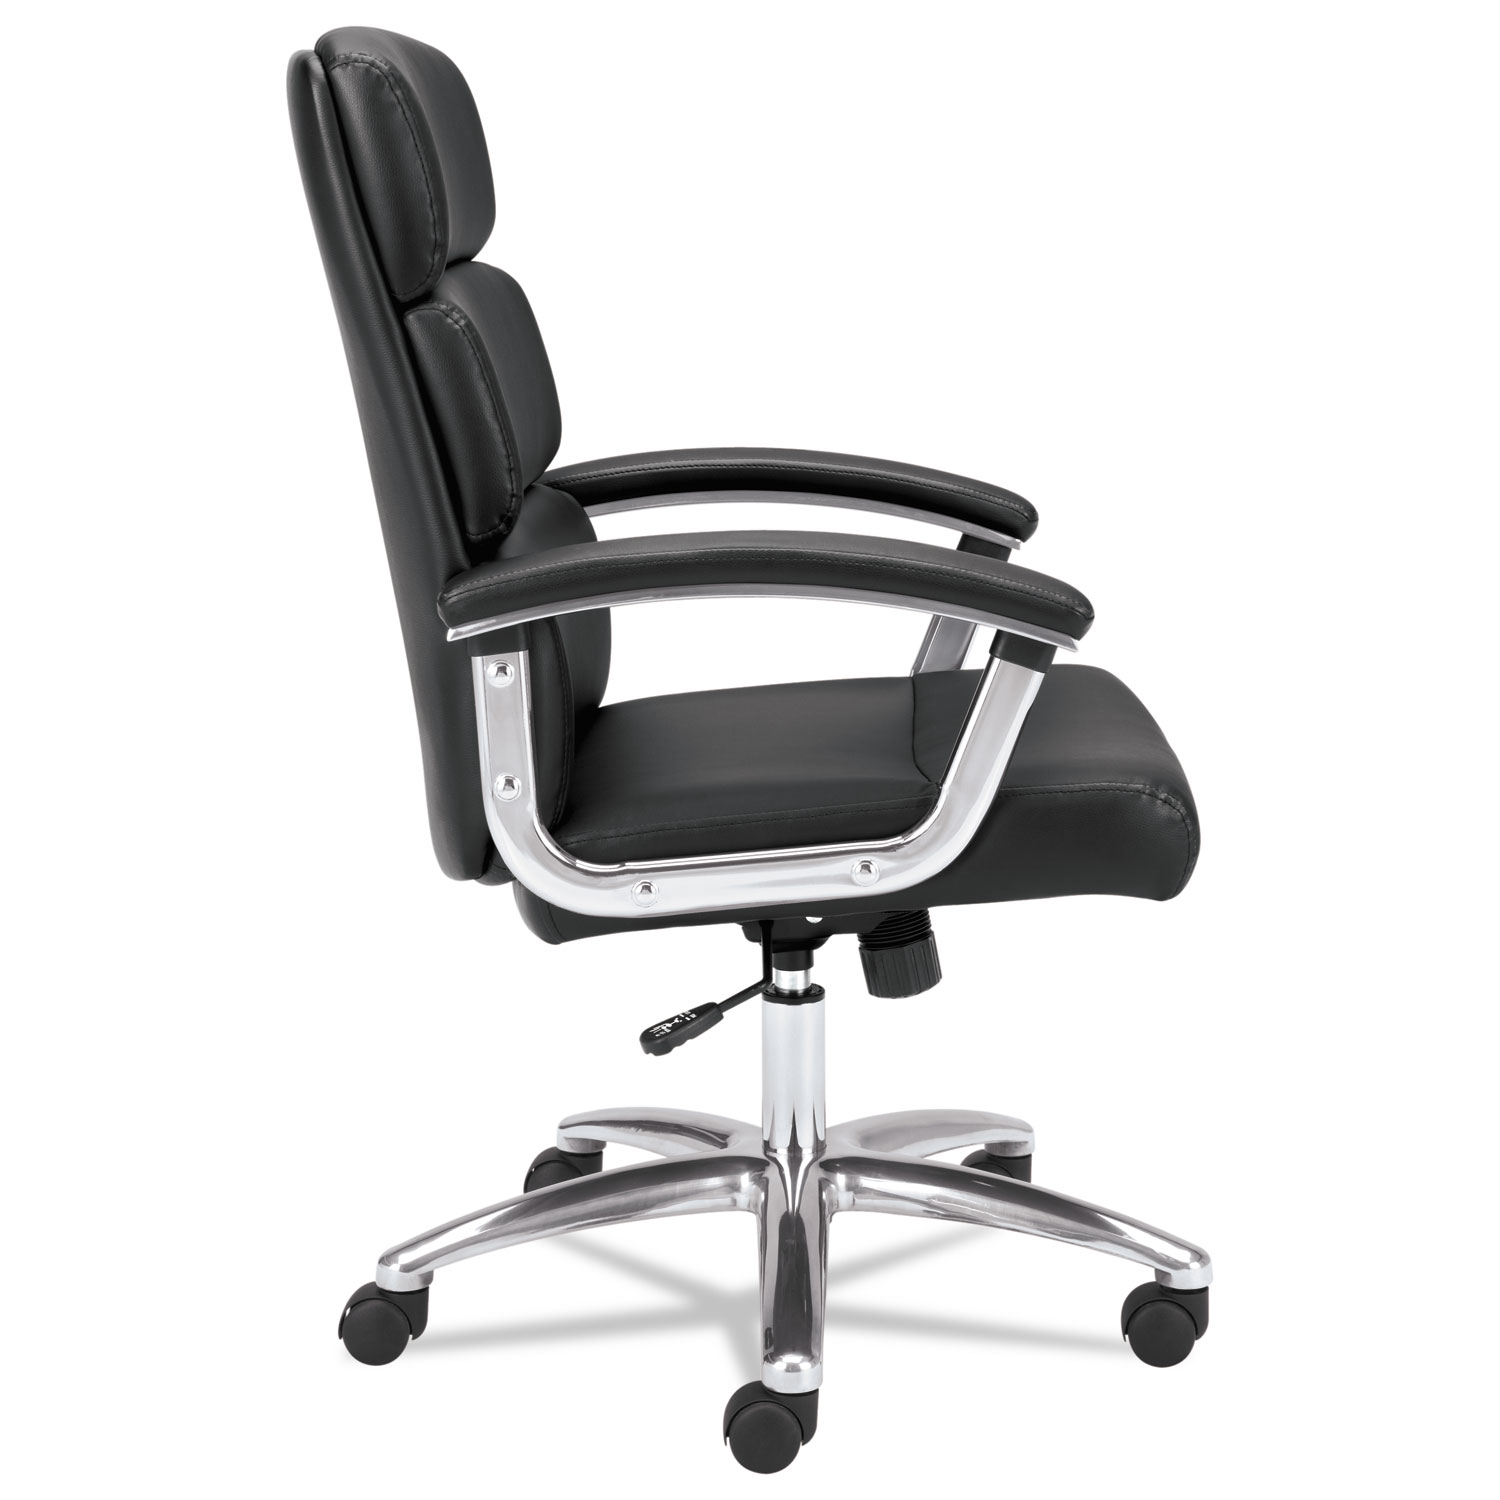 VL103 Series Executive Mid-Back Chair, Black Leather